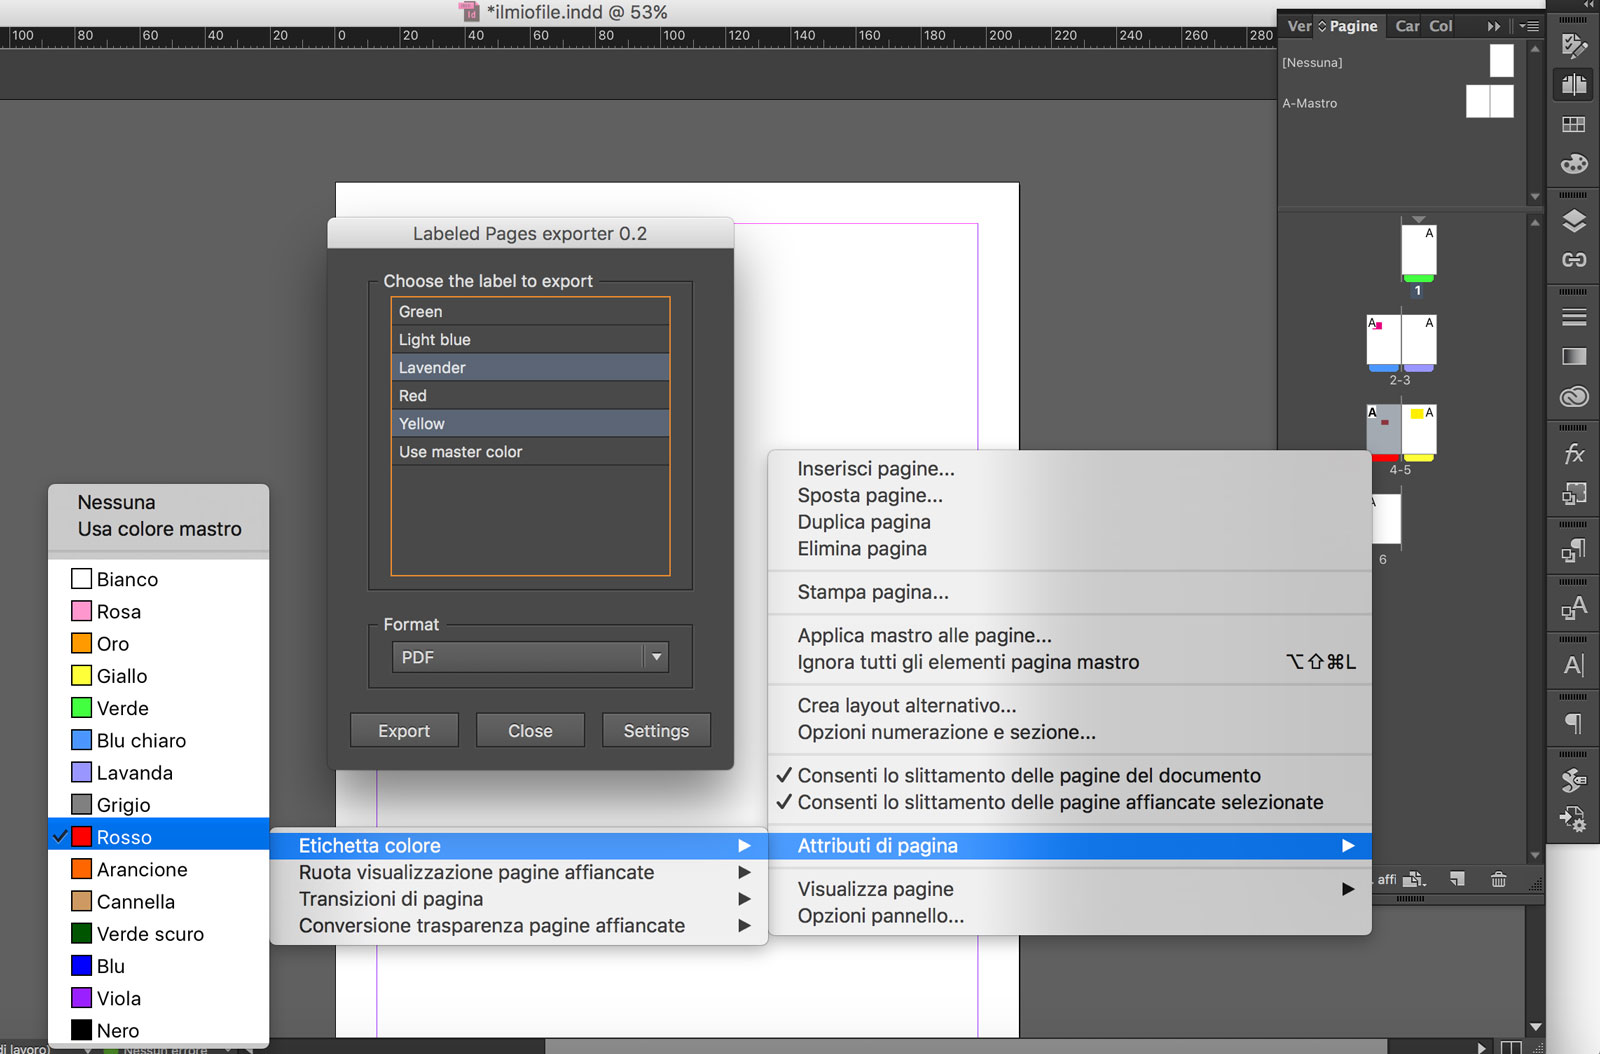 export-selected-page-indesign.jpg